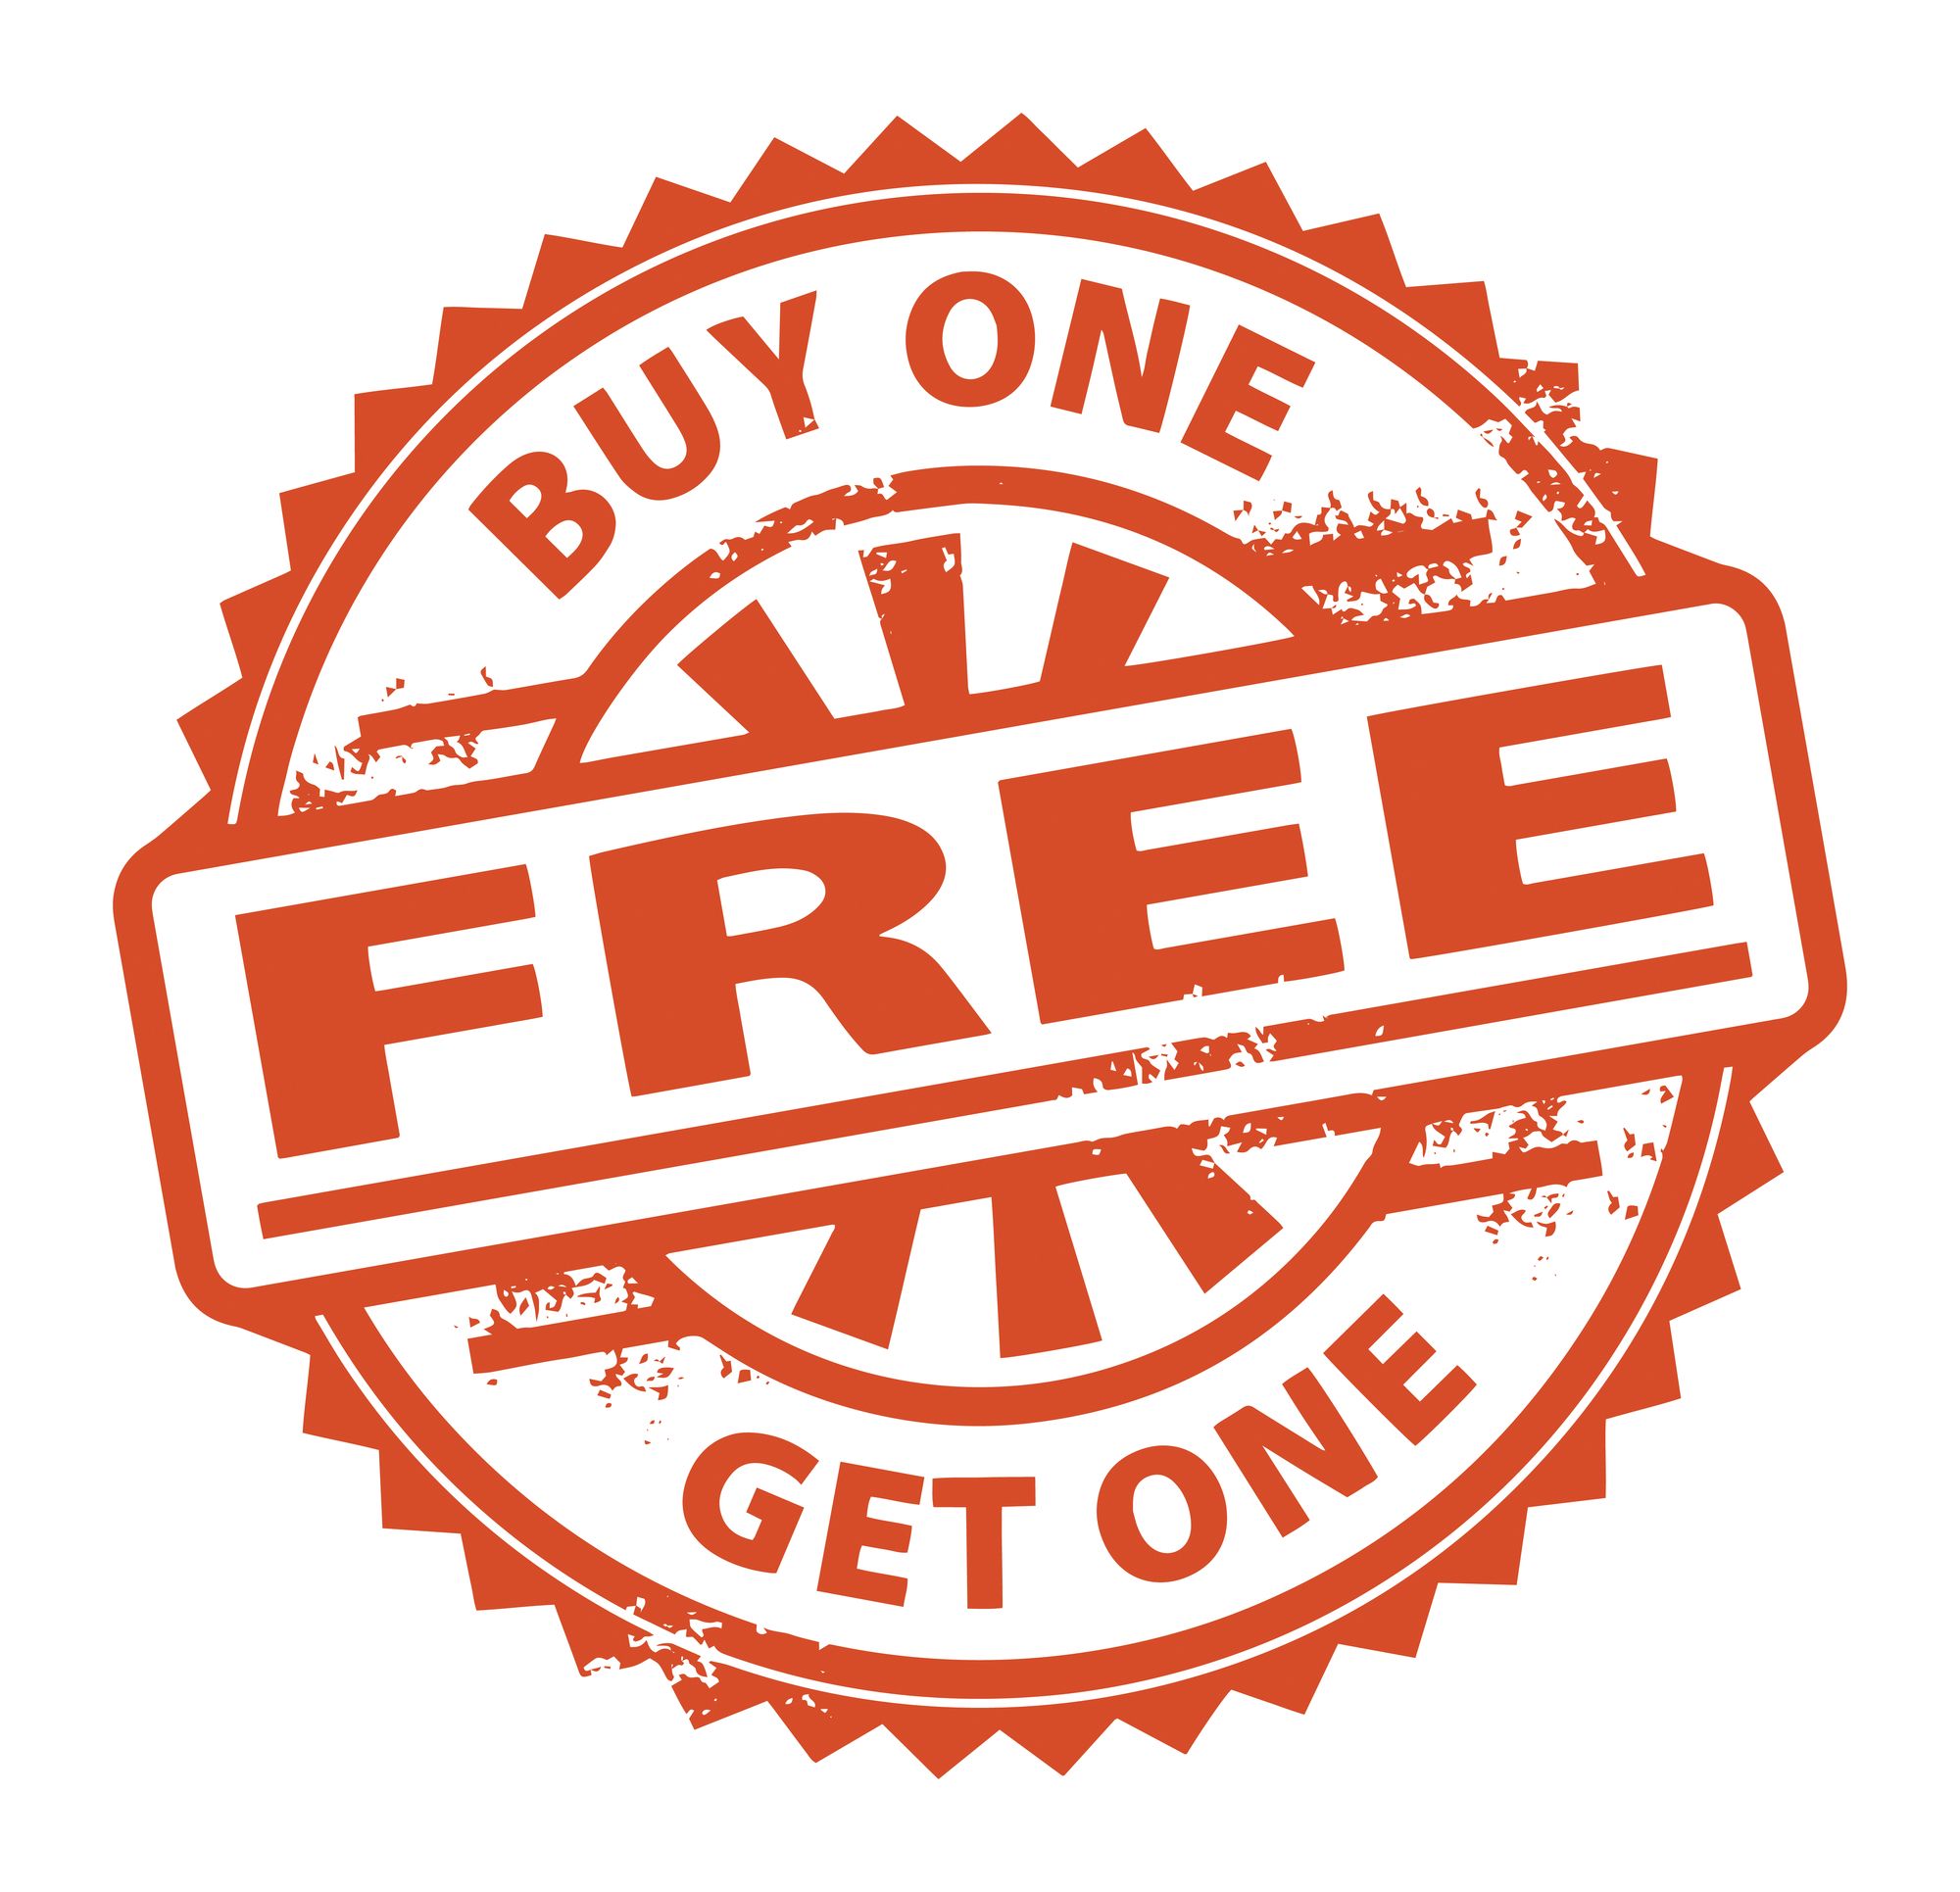 buy one get one free promotion at puritan's pride